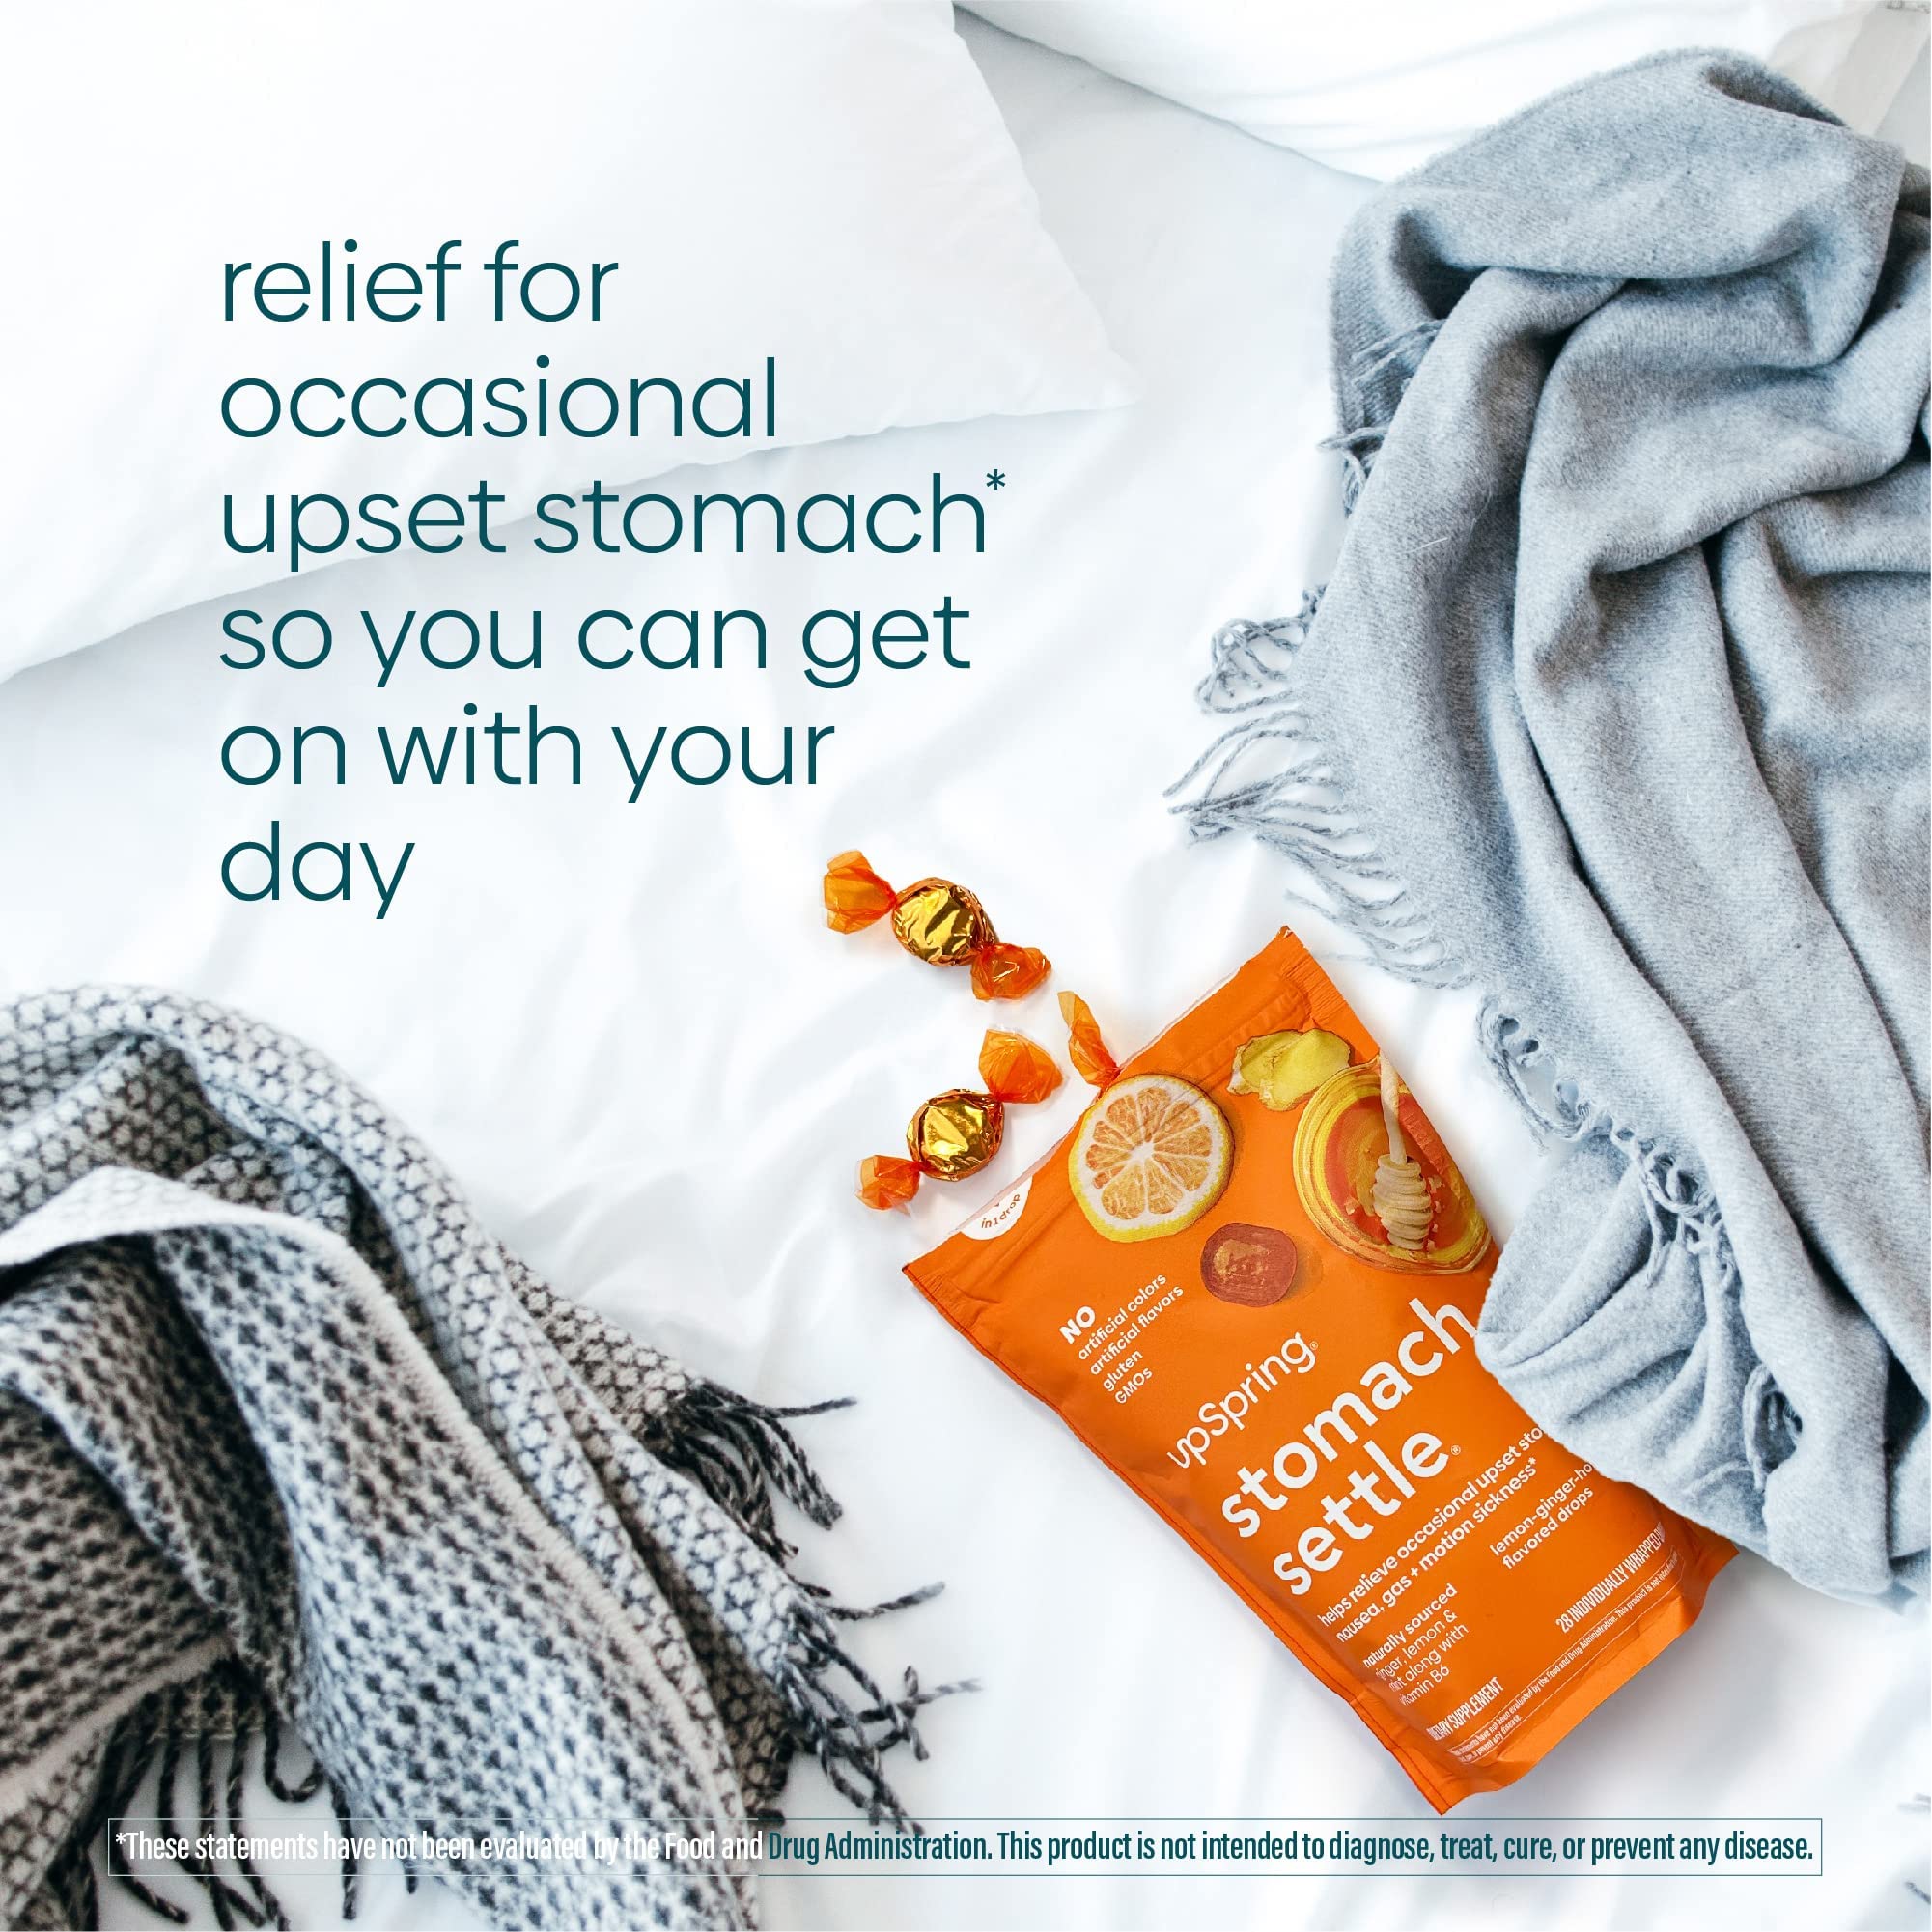 UpSpring Stomach Settle Drops for Occasional Nausea Relief and Morning Sickness with Ginger, Lemon, Spearmint, and B6. Individually Wrapped Drops, 55 Ct(Packaging May Vary)